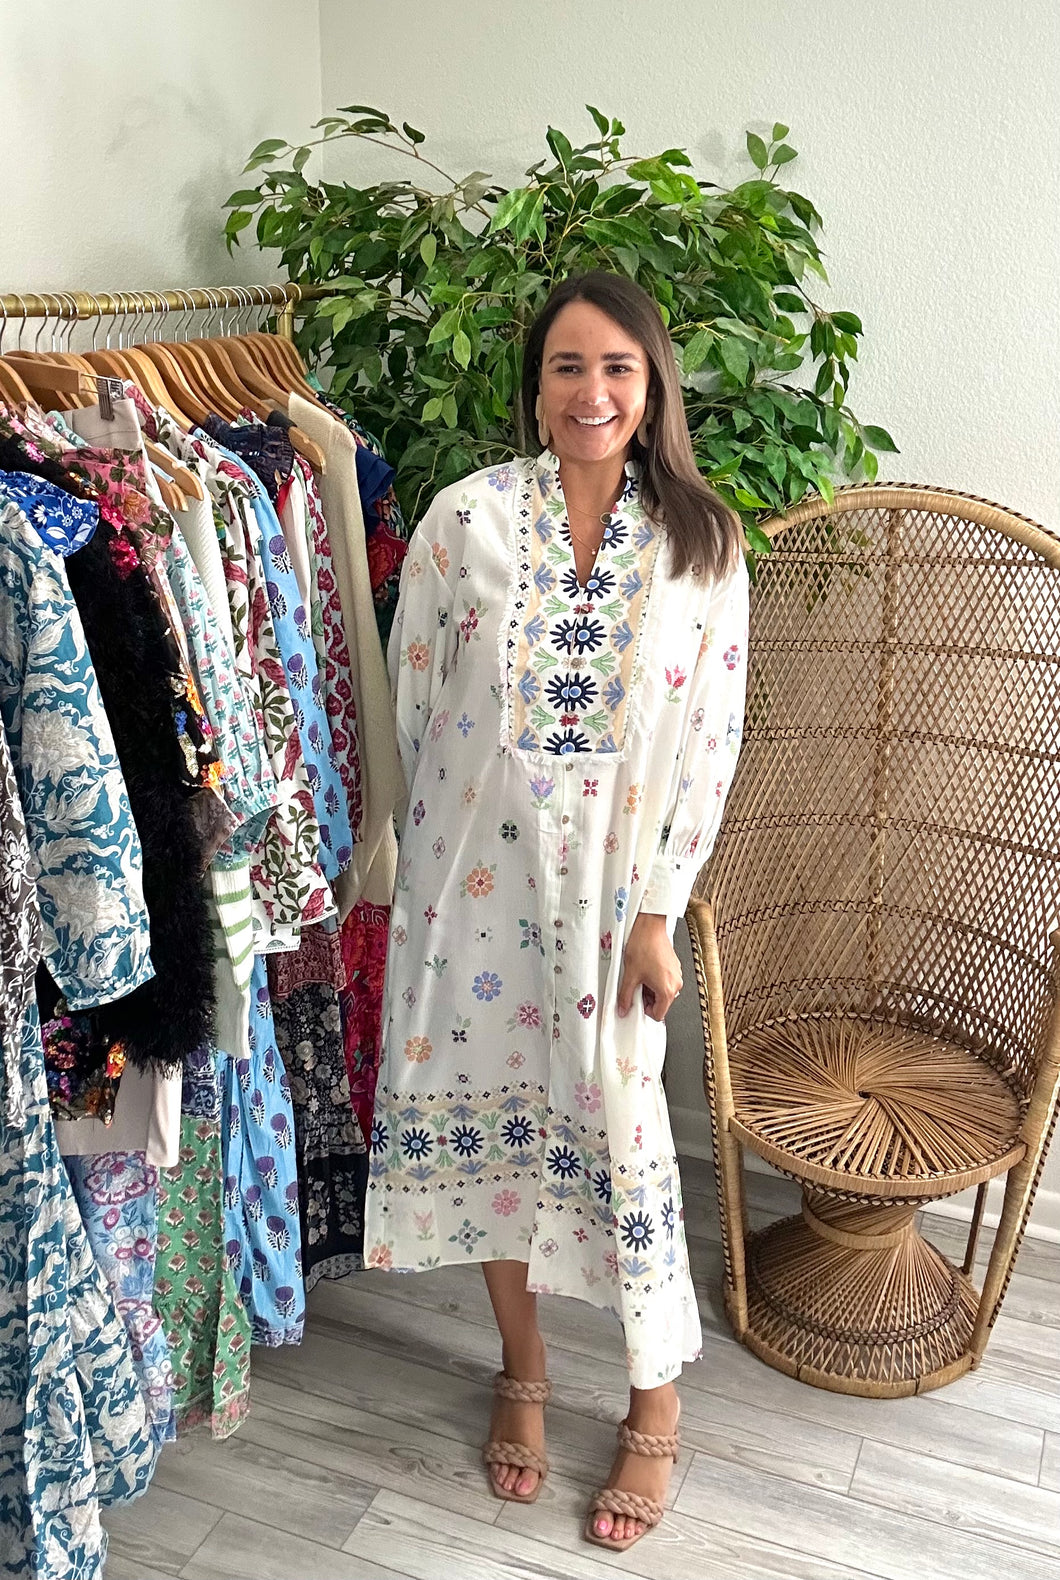 Embroidered printed ankle caftan. Fringe detailing at yoke, functional buttons down the frontside, side and front slits. Linen poly blend.  True to size, wearing size small.  Good for bump, post bump or no bump!